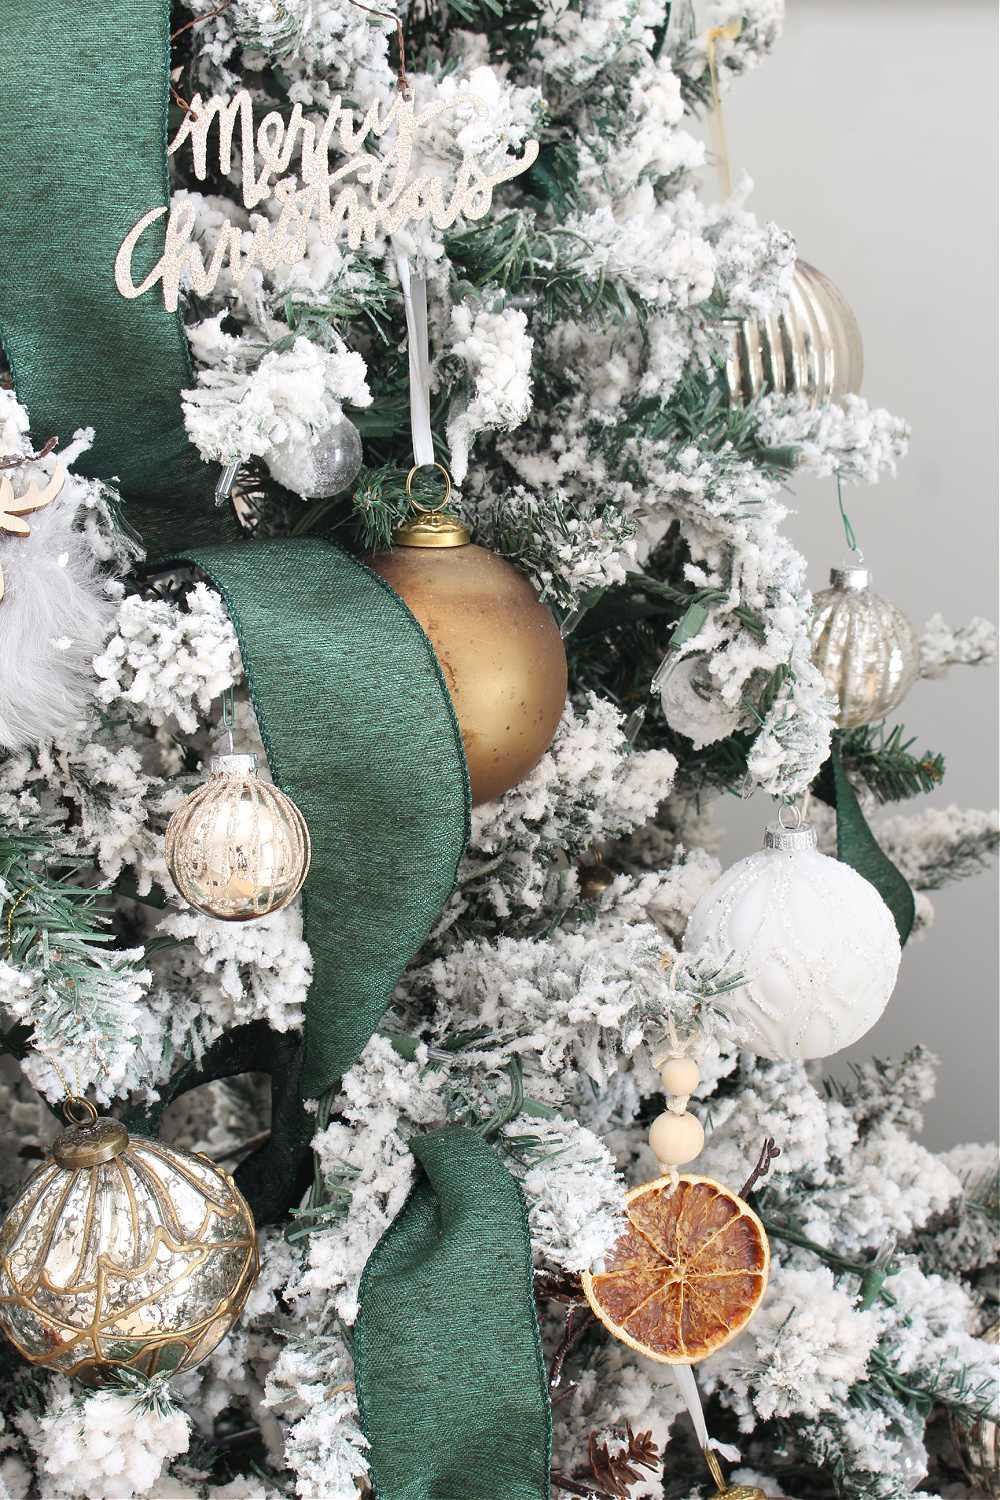 Christmas tree decorated with metallics and dried oranges.